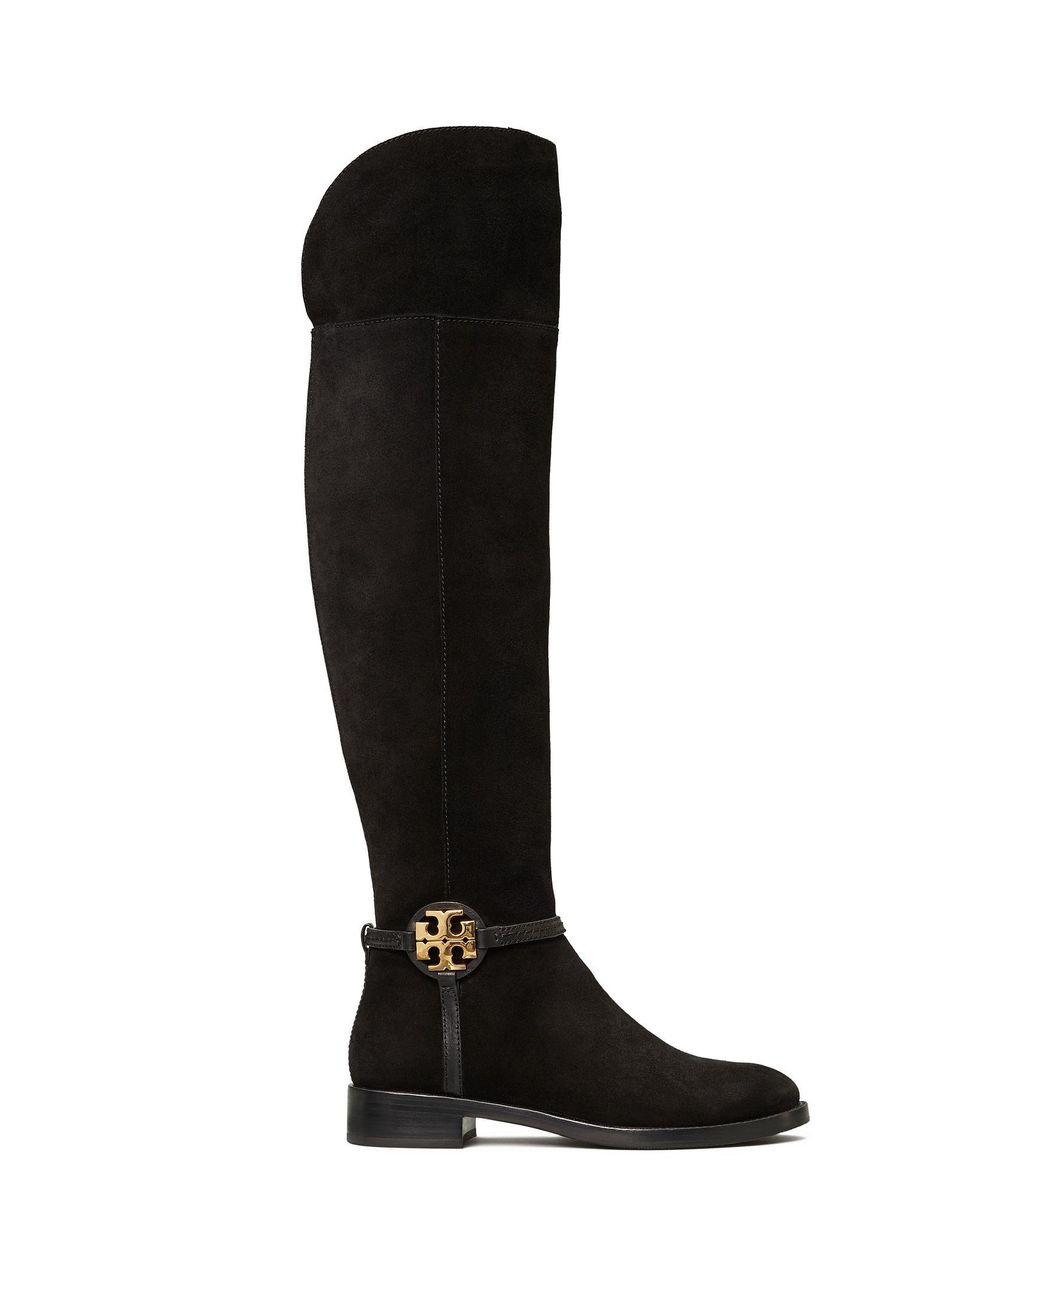 tory burch over knee boots